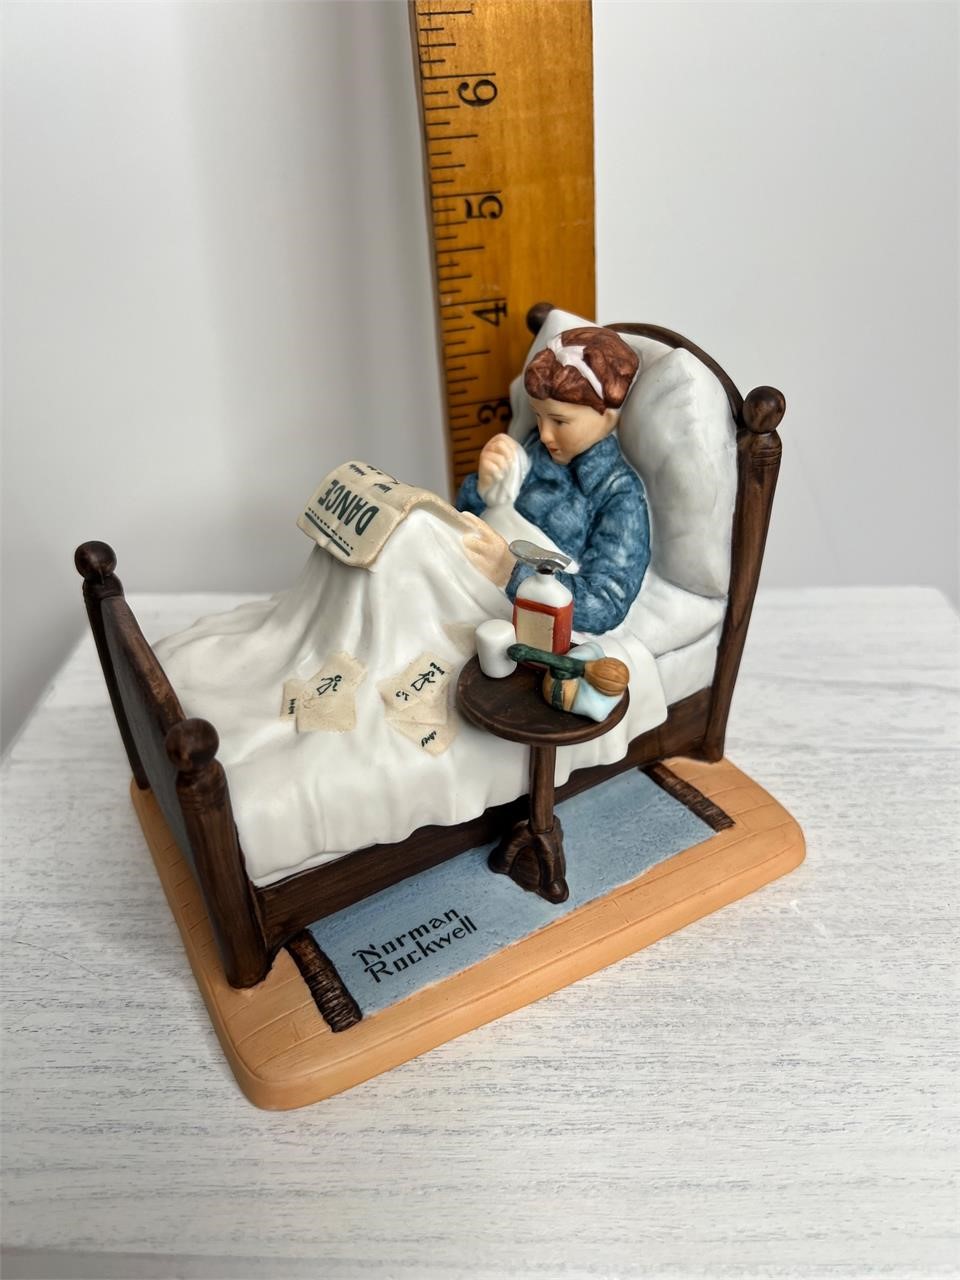 Norman Rockwell Porcelain The Cold Danbury Mint